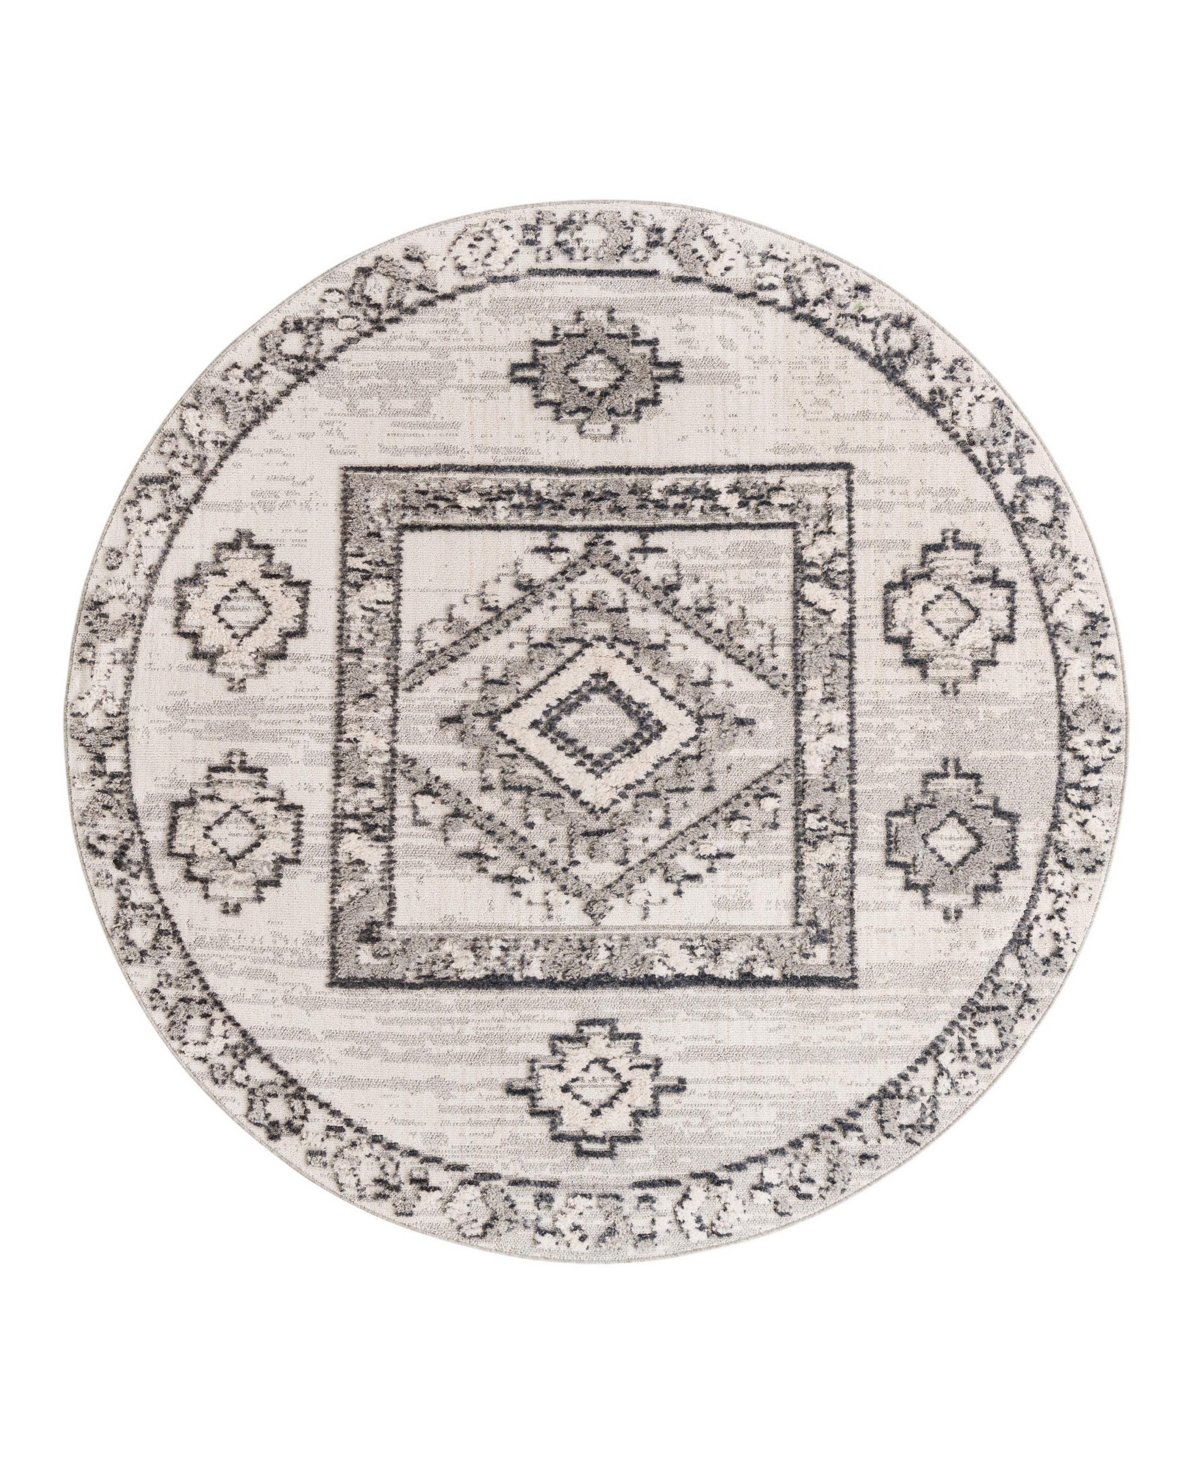 Bayshore Home High-low Pile Upland Upl03 7' X 7' Round Area Rug In Sand